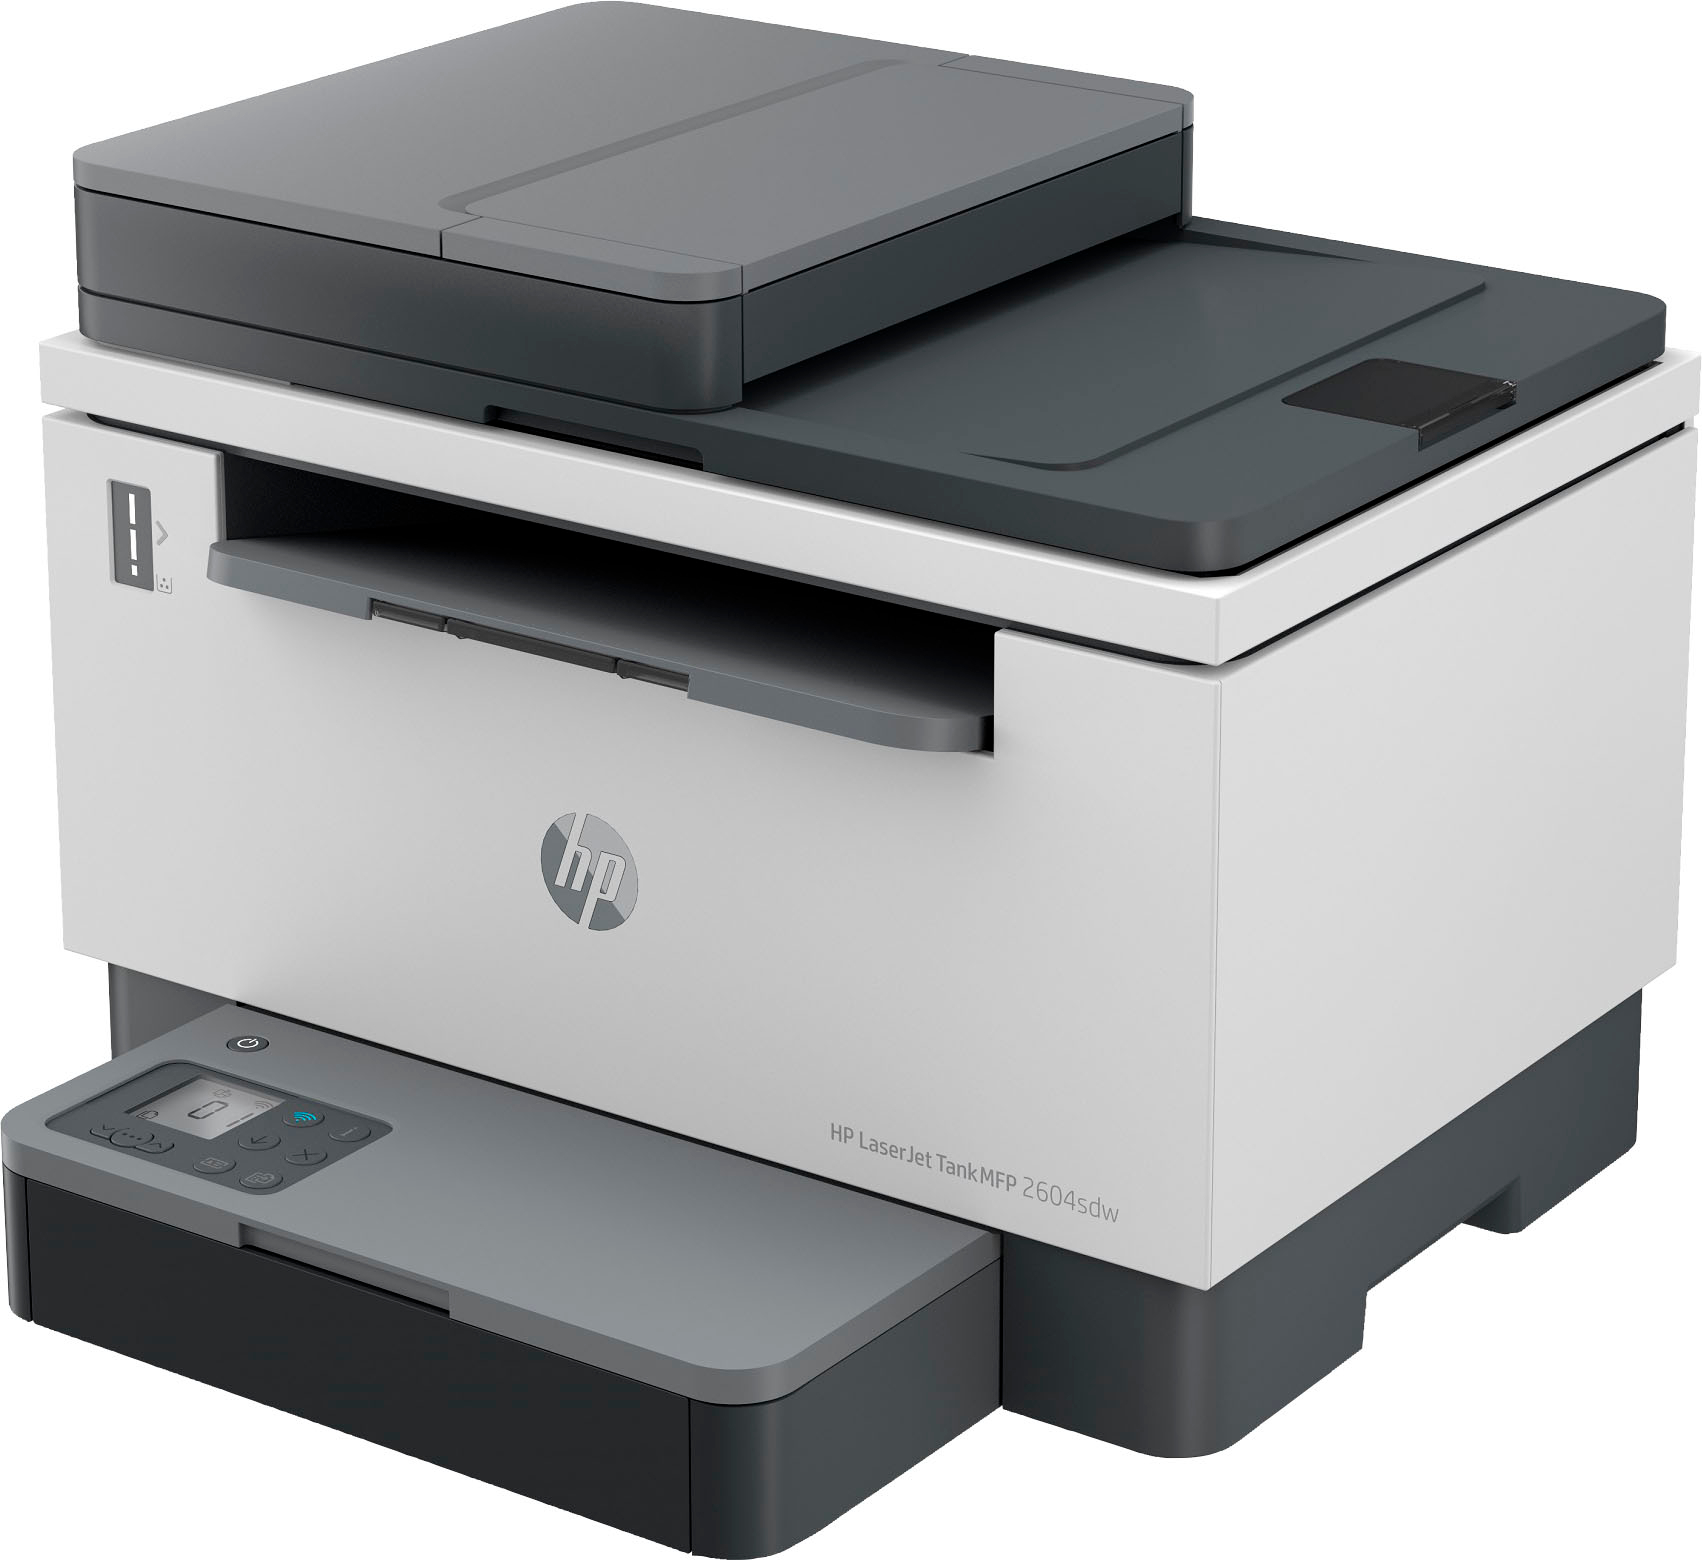 HP LaserJet Tank 2604sdw Wireless Black-and-White All-In-One Laser Printer preloaded with up to 2 years of toner White 2604sdw - Best Buy